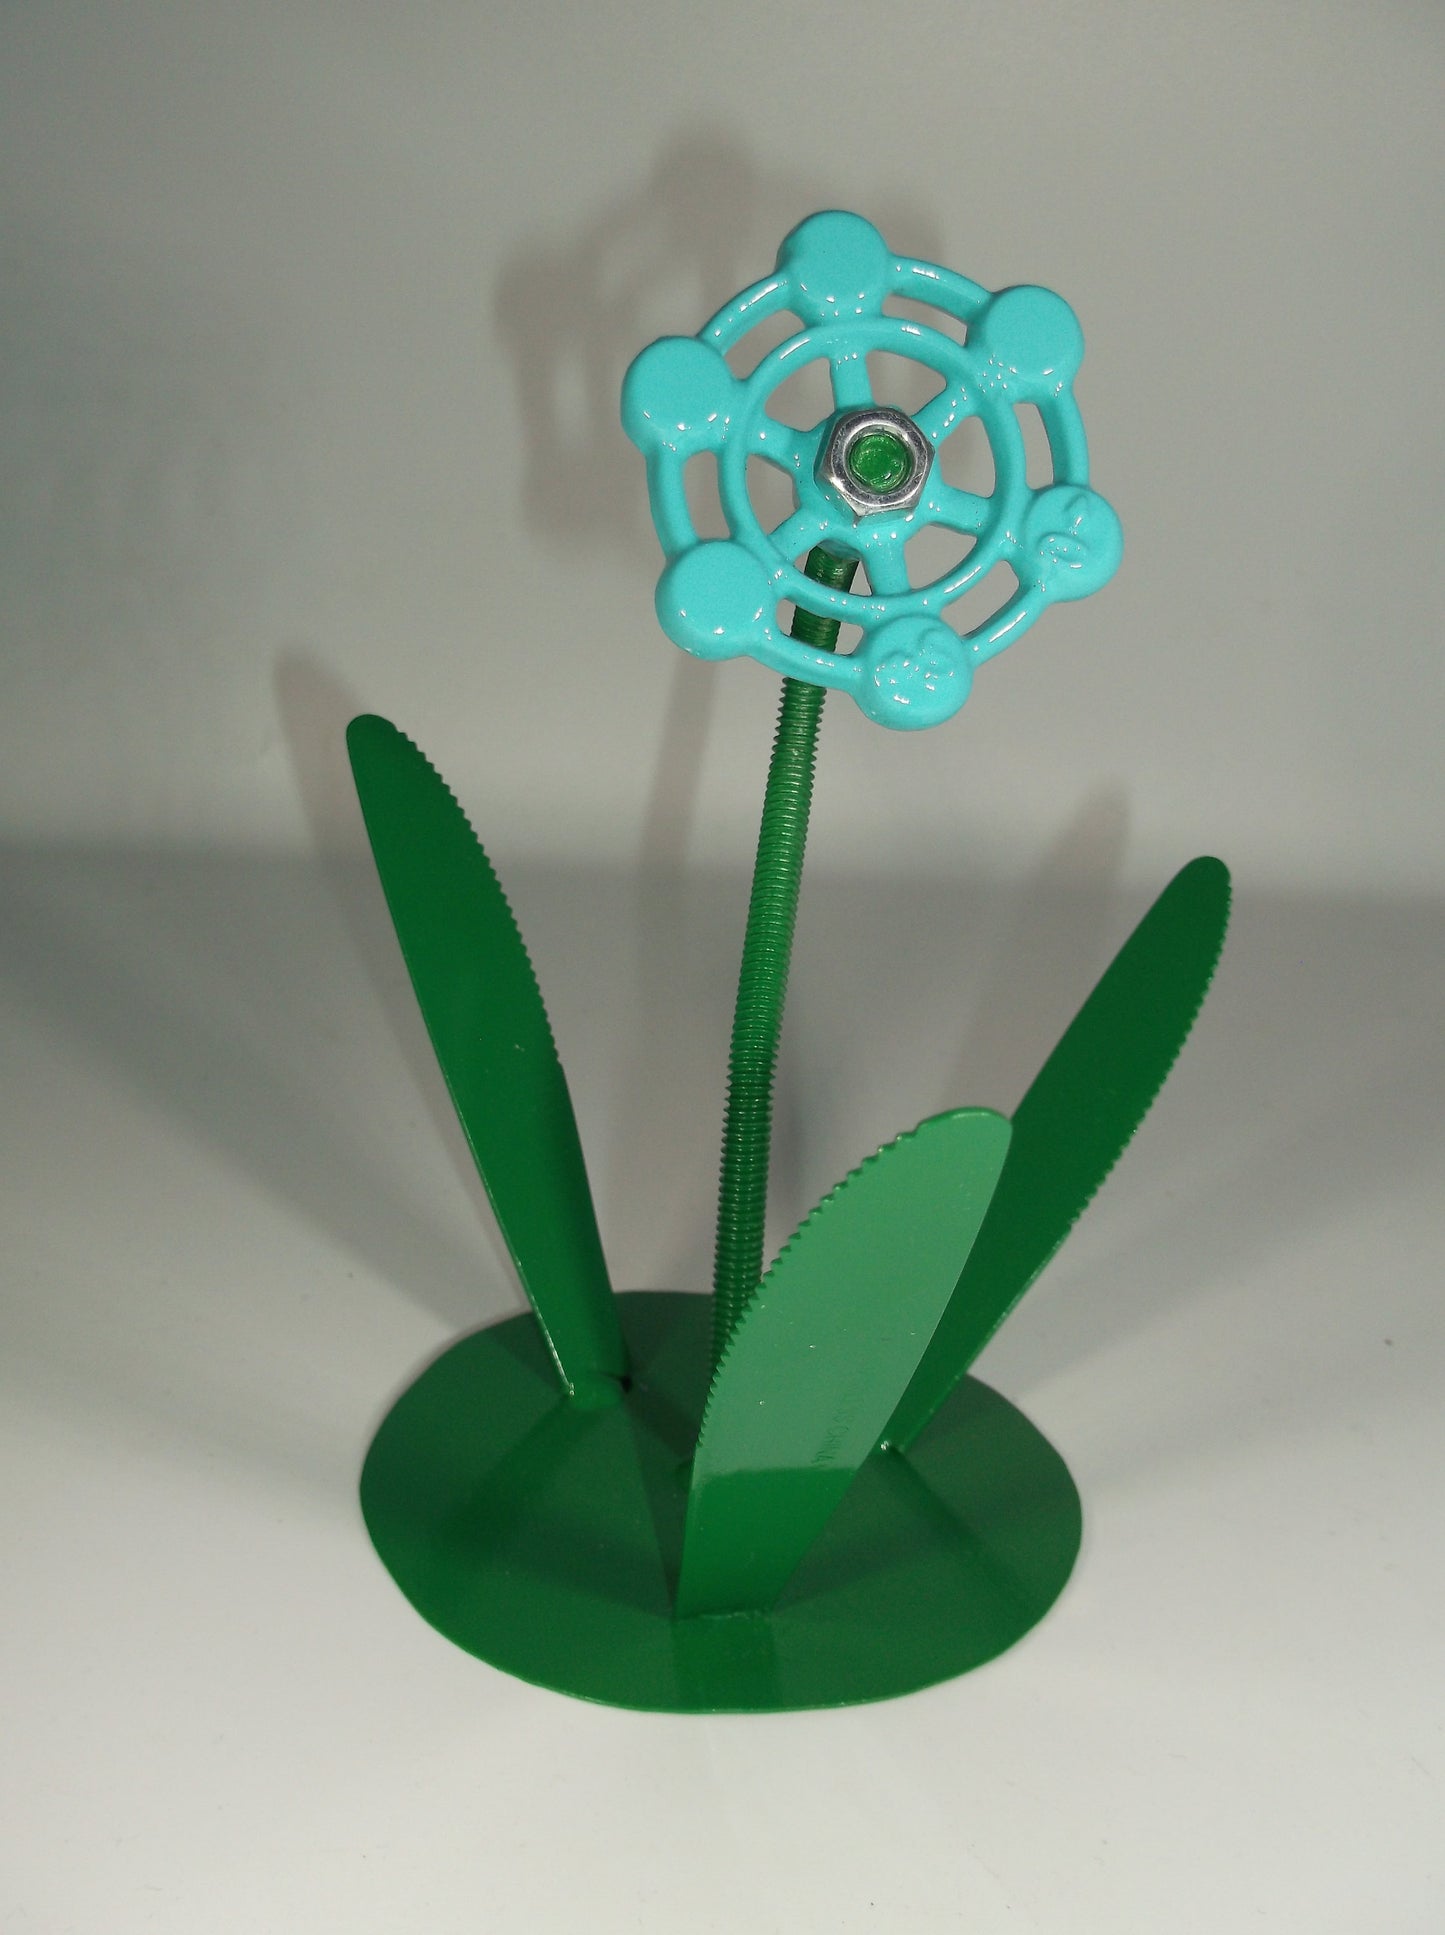 Teal Blue Metal Flower, Floral Decor, Faucet Flower up cycled Art